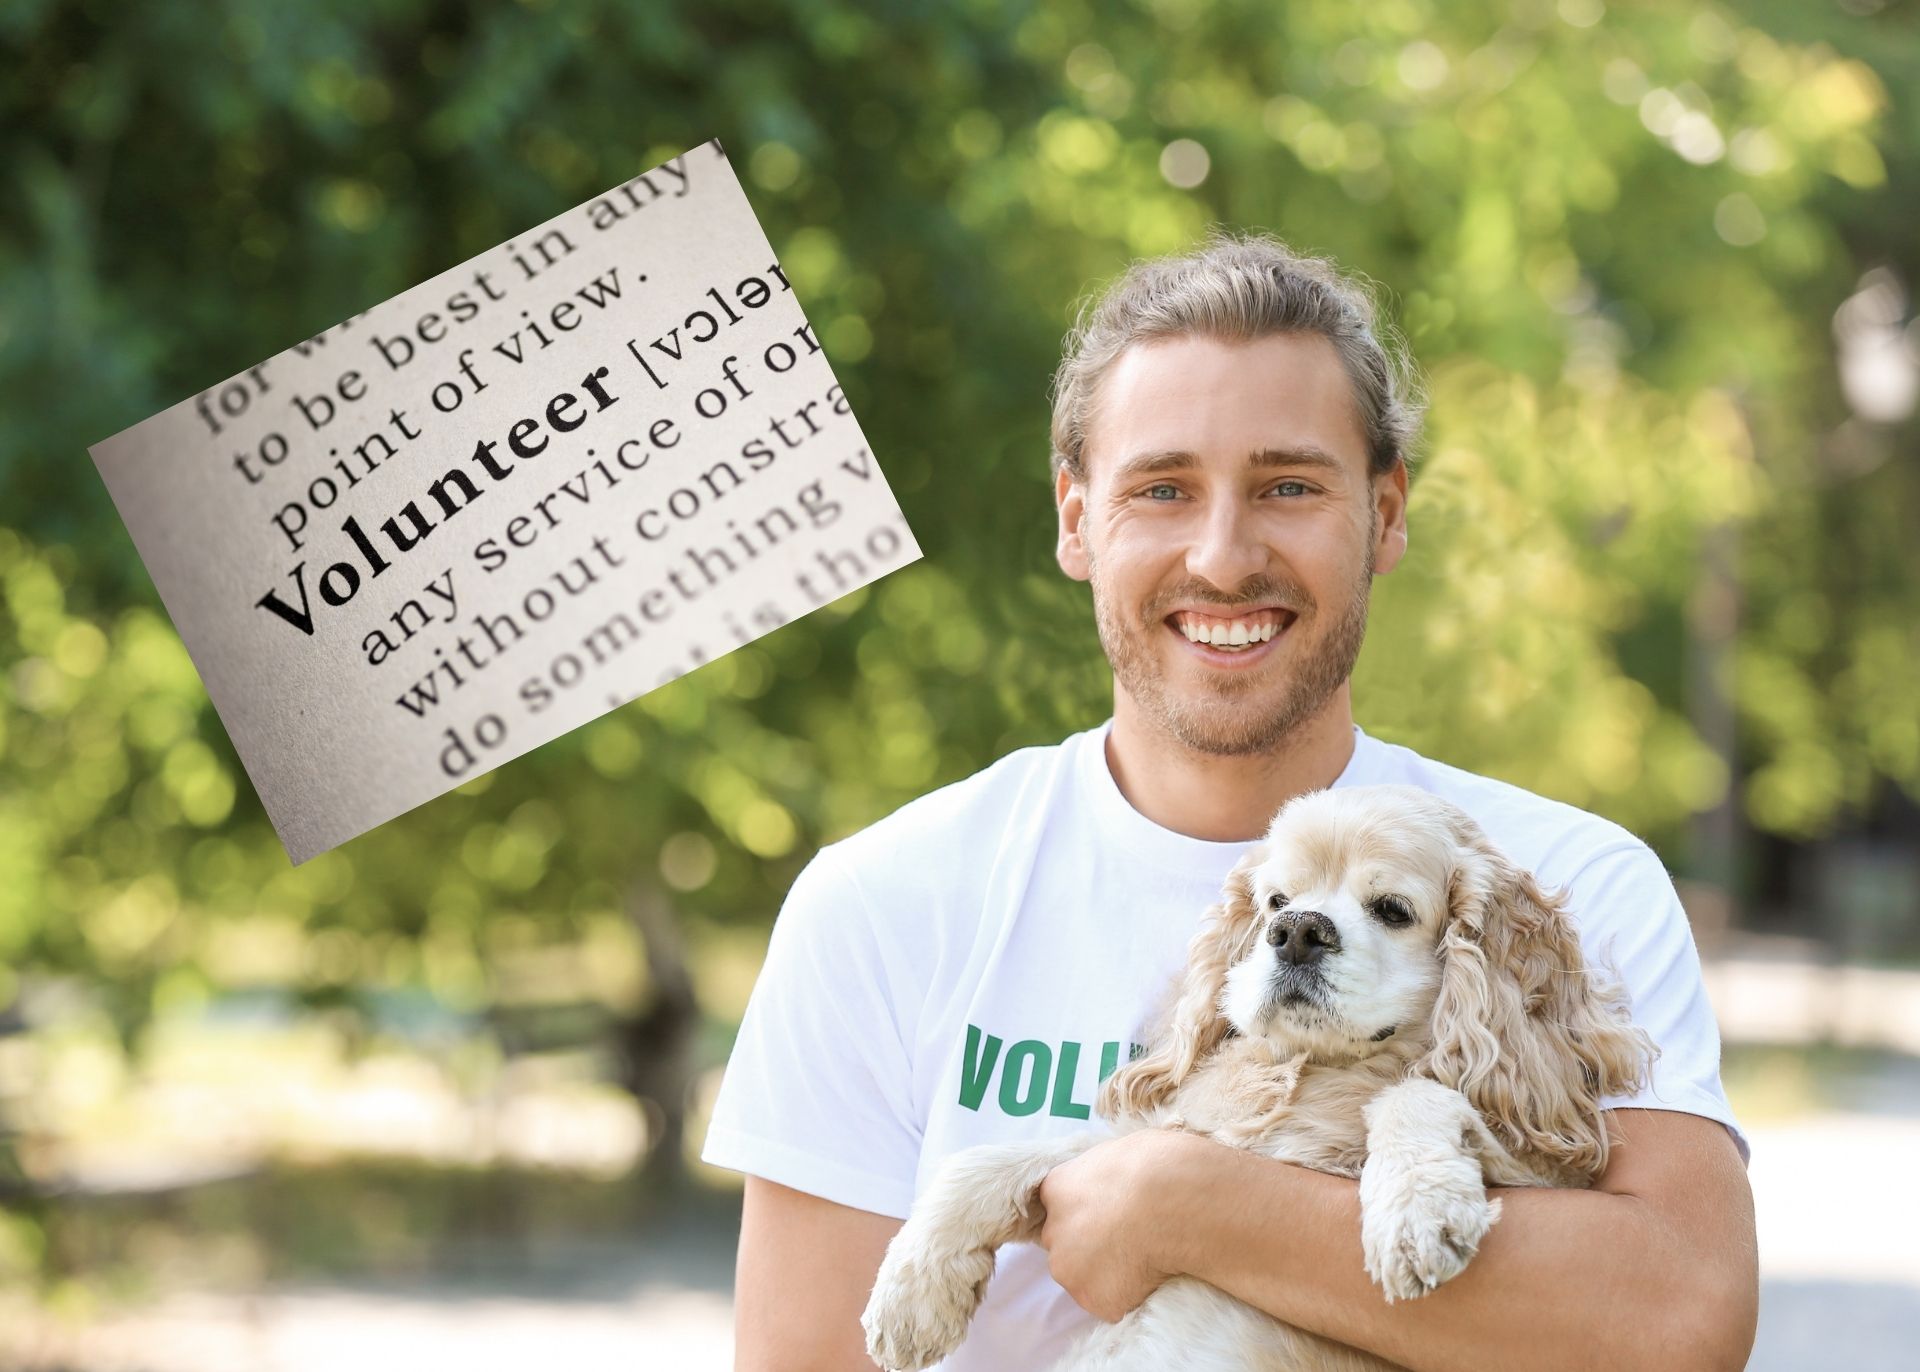 Smiling young man holding aging cocker spaniel with dictionary definition of "volunteerism" superimposed